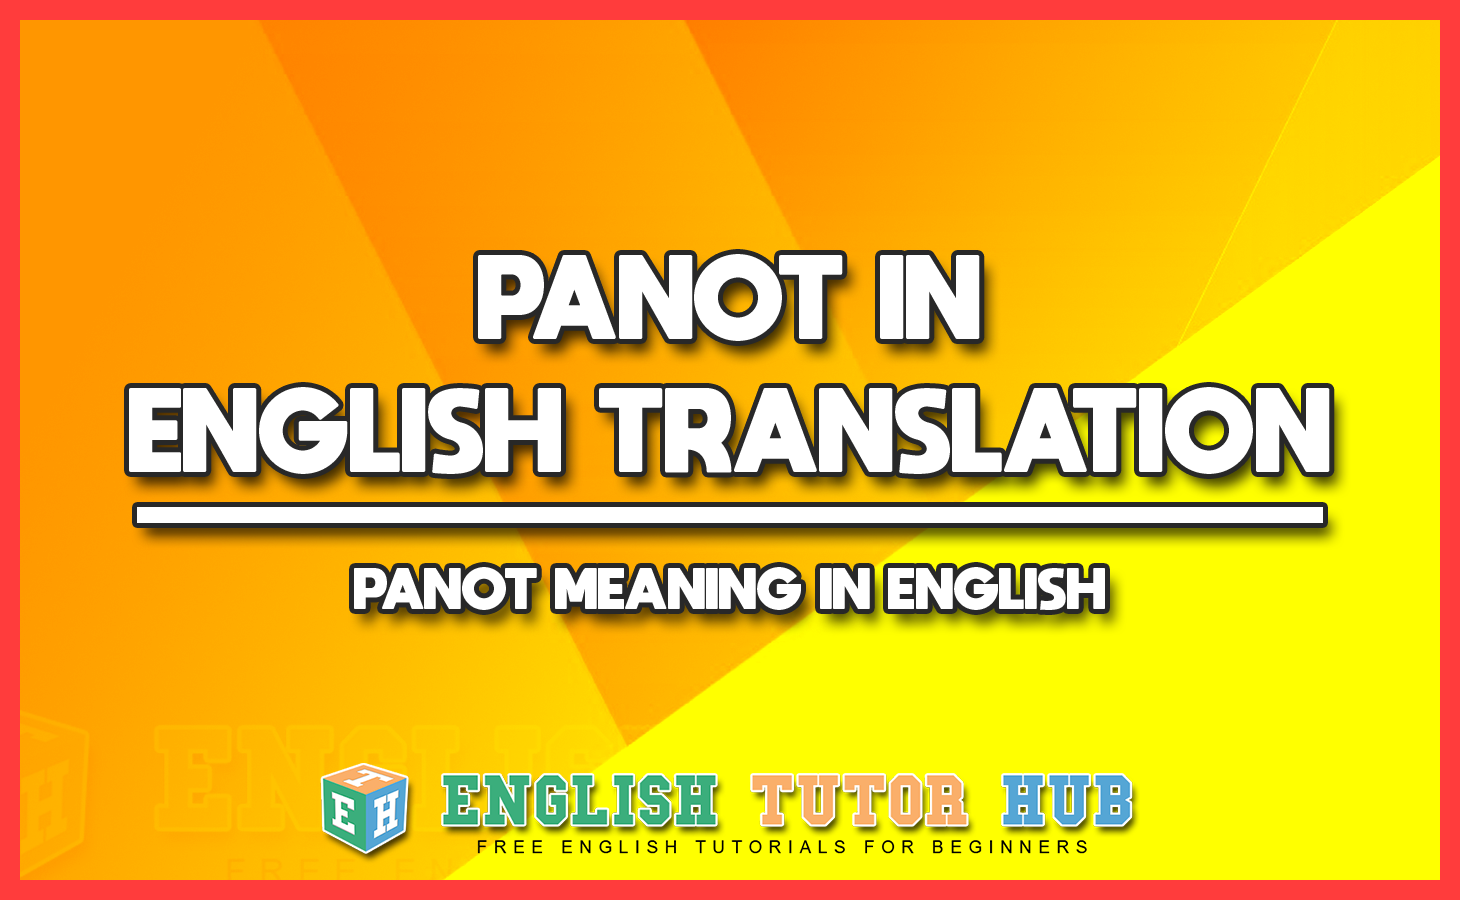 PANOT IN ENGLISH TRANSLATION - PANOT MEANING IN ENGLISH